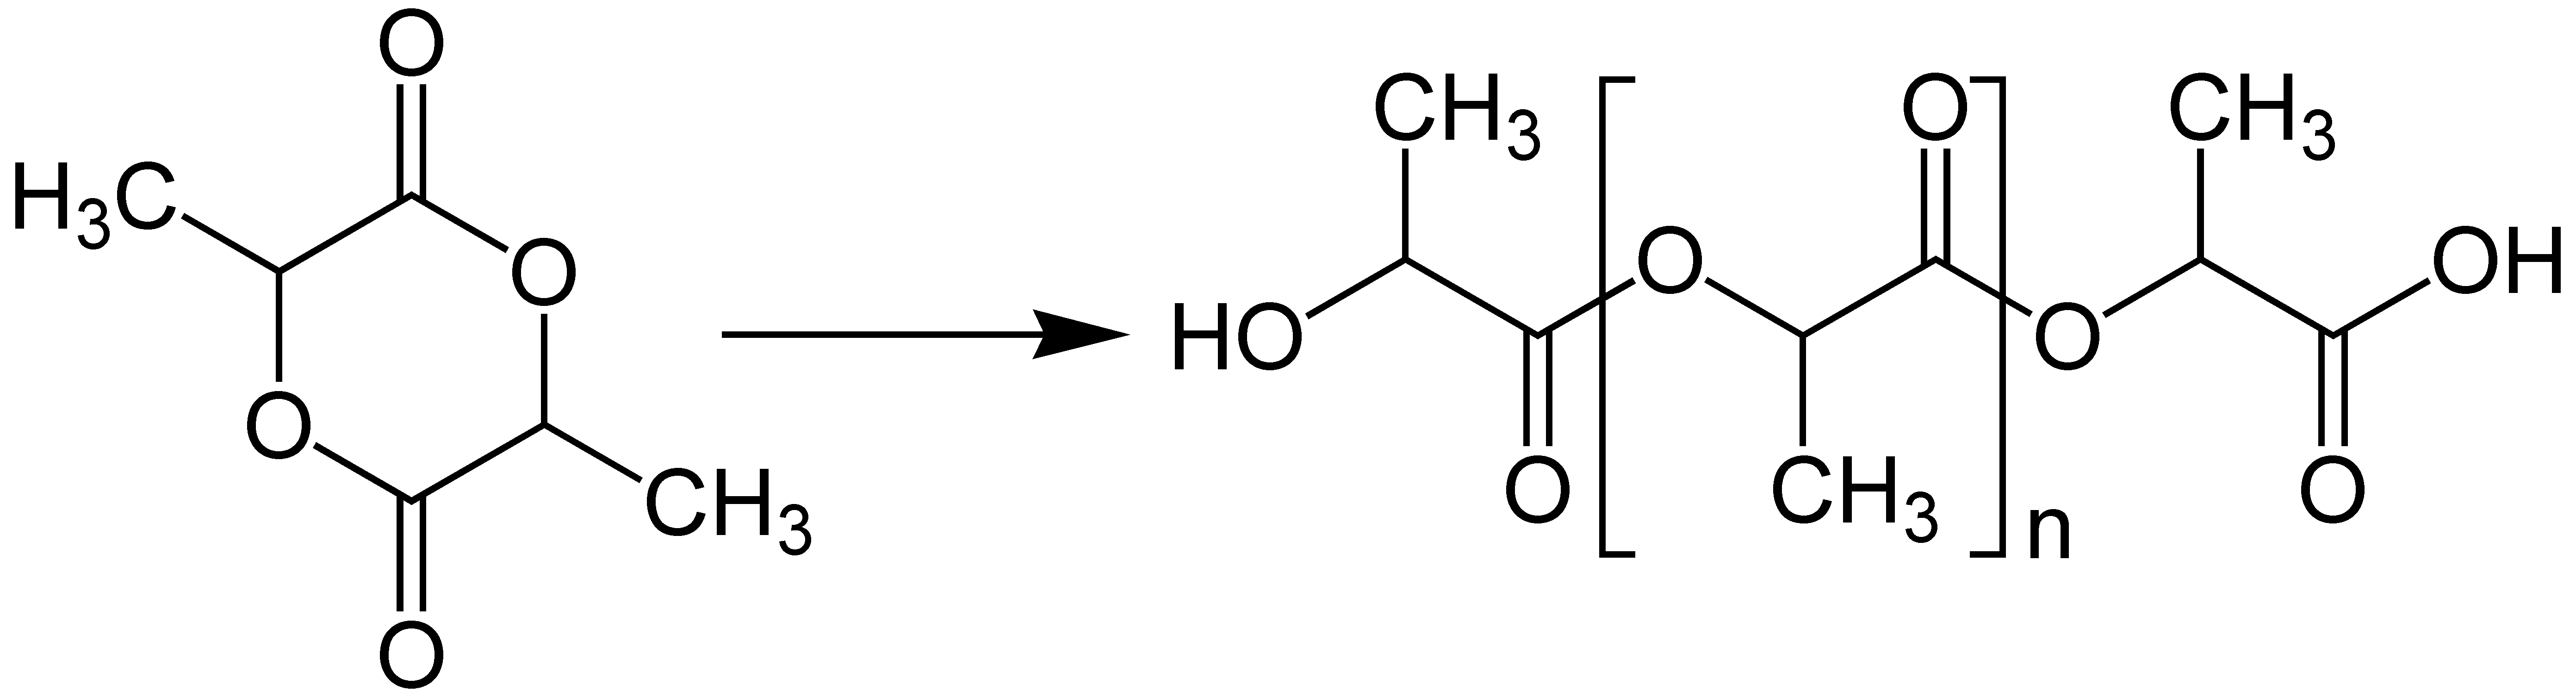 Polylactide_synthesis_v.1.png